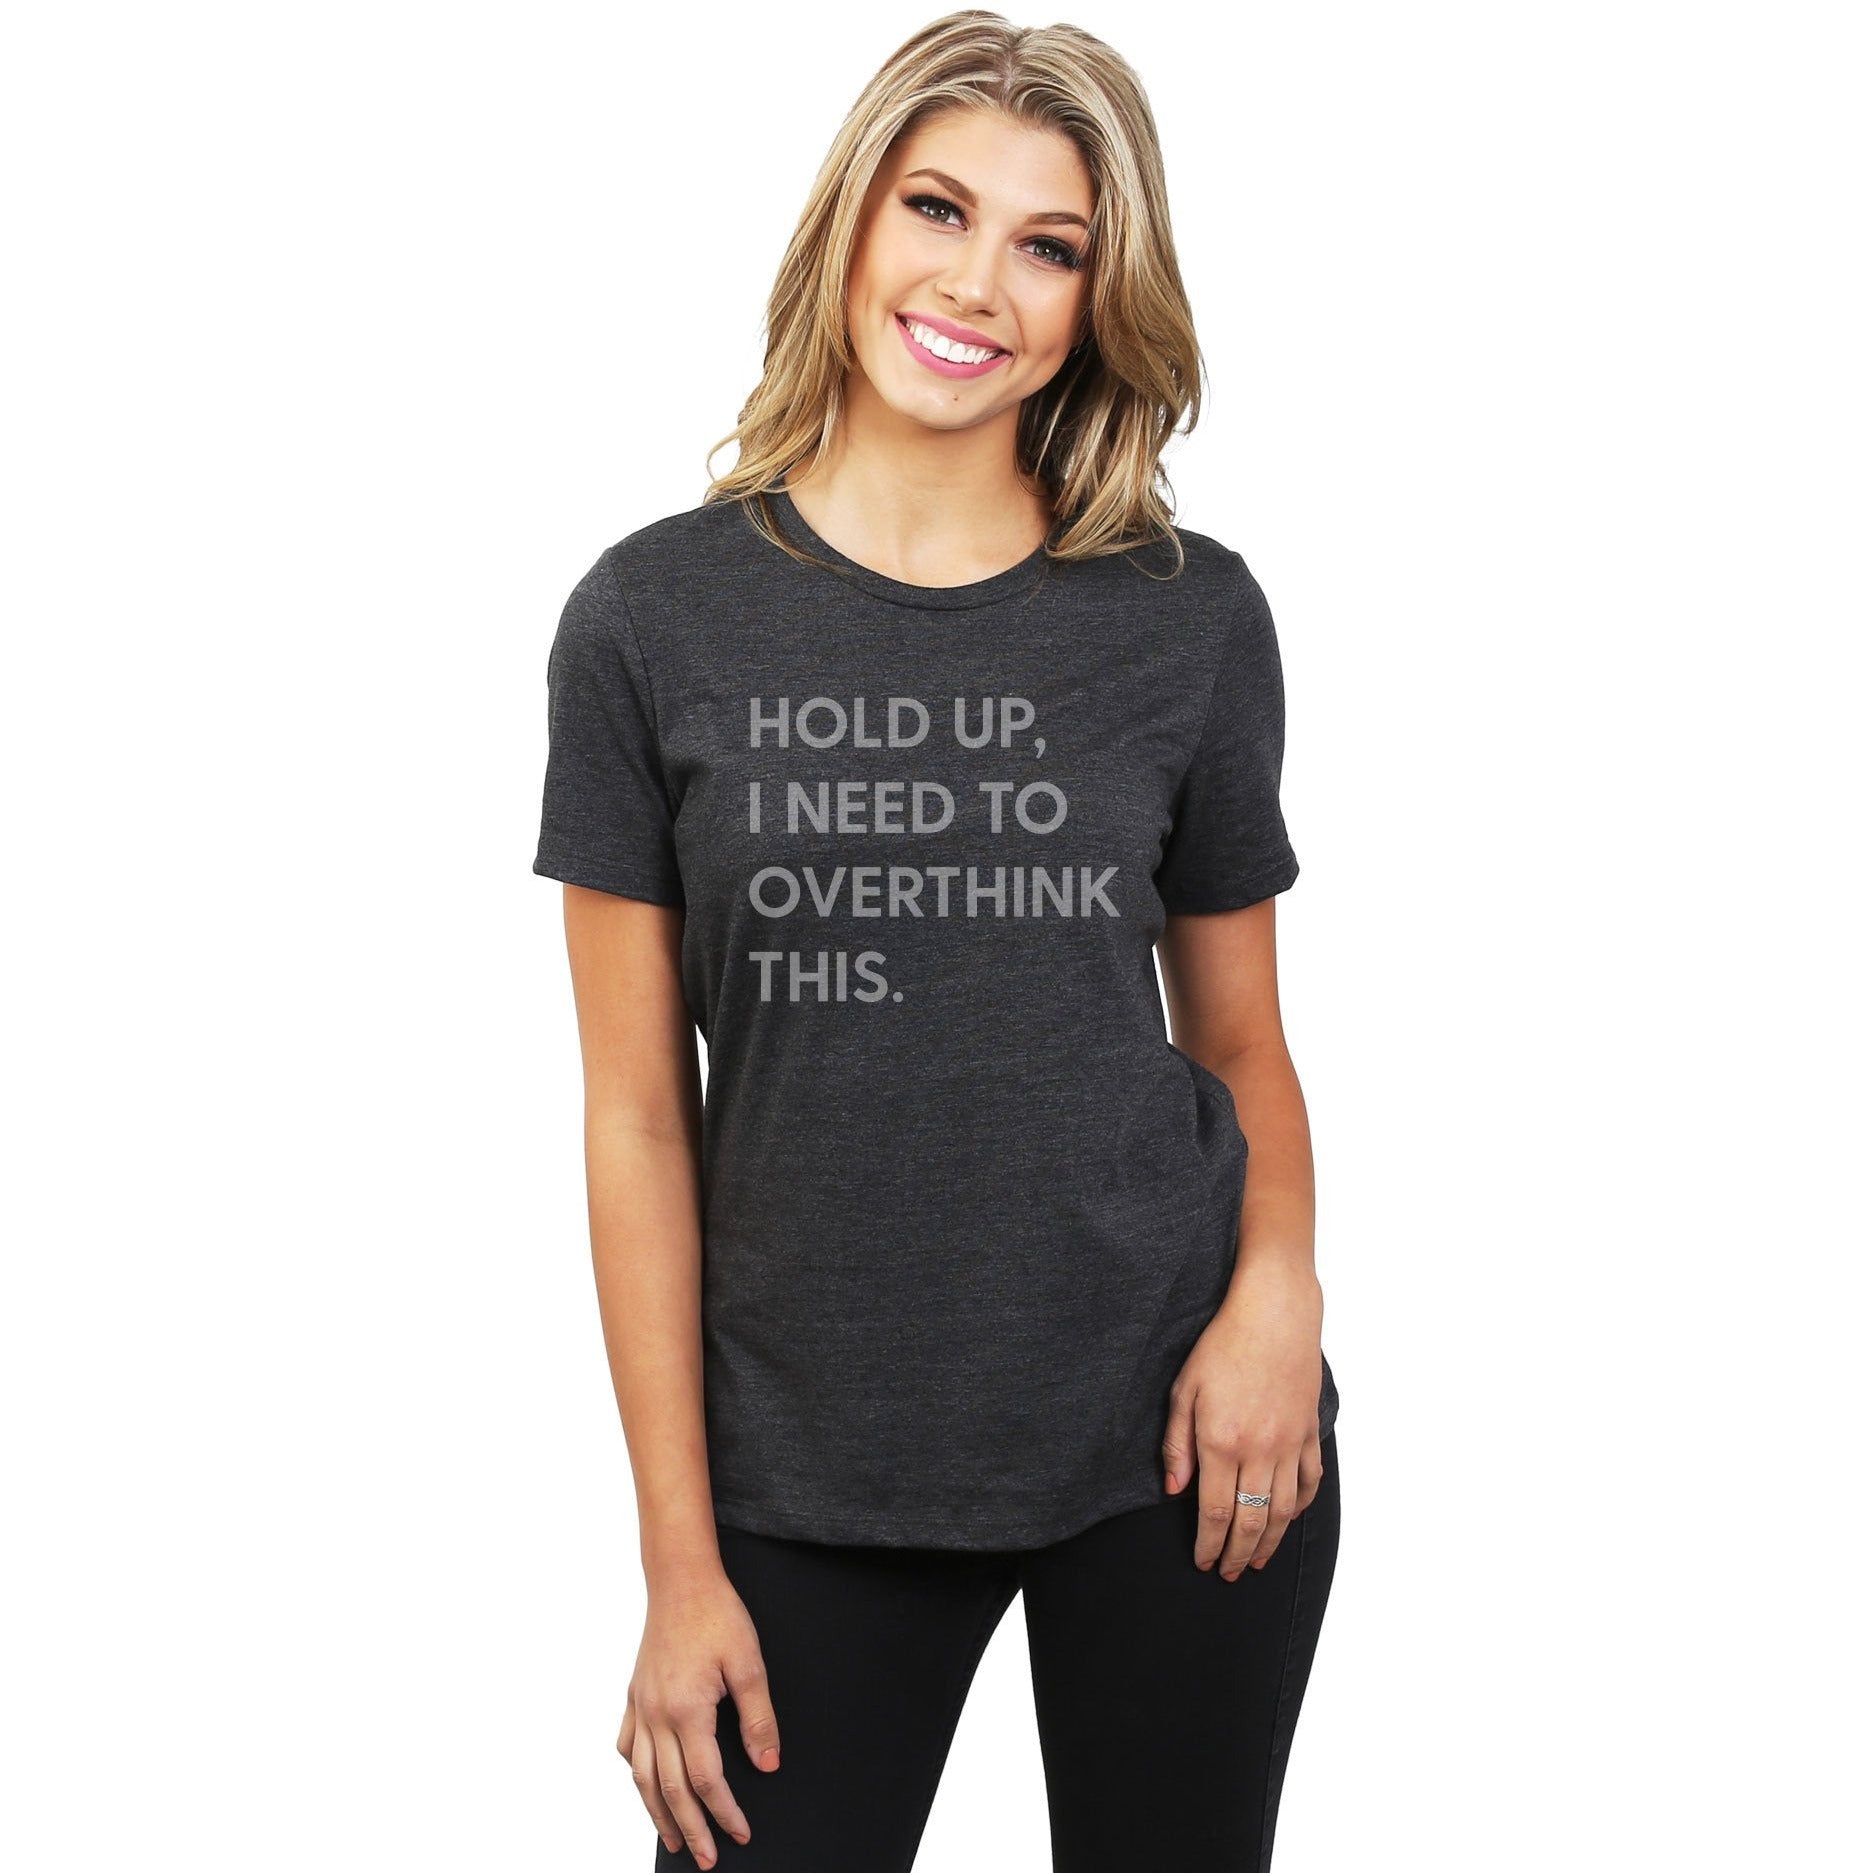 Hold Up, I Need To Rethink This Women's Relaxed Crewneck T-Shirt Top Tee Charcoal Model
